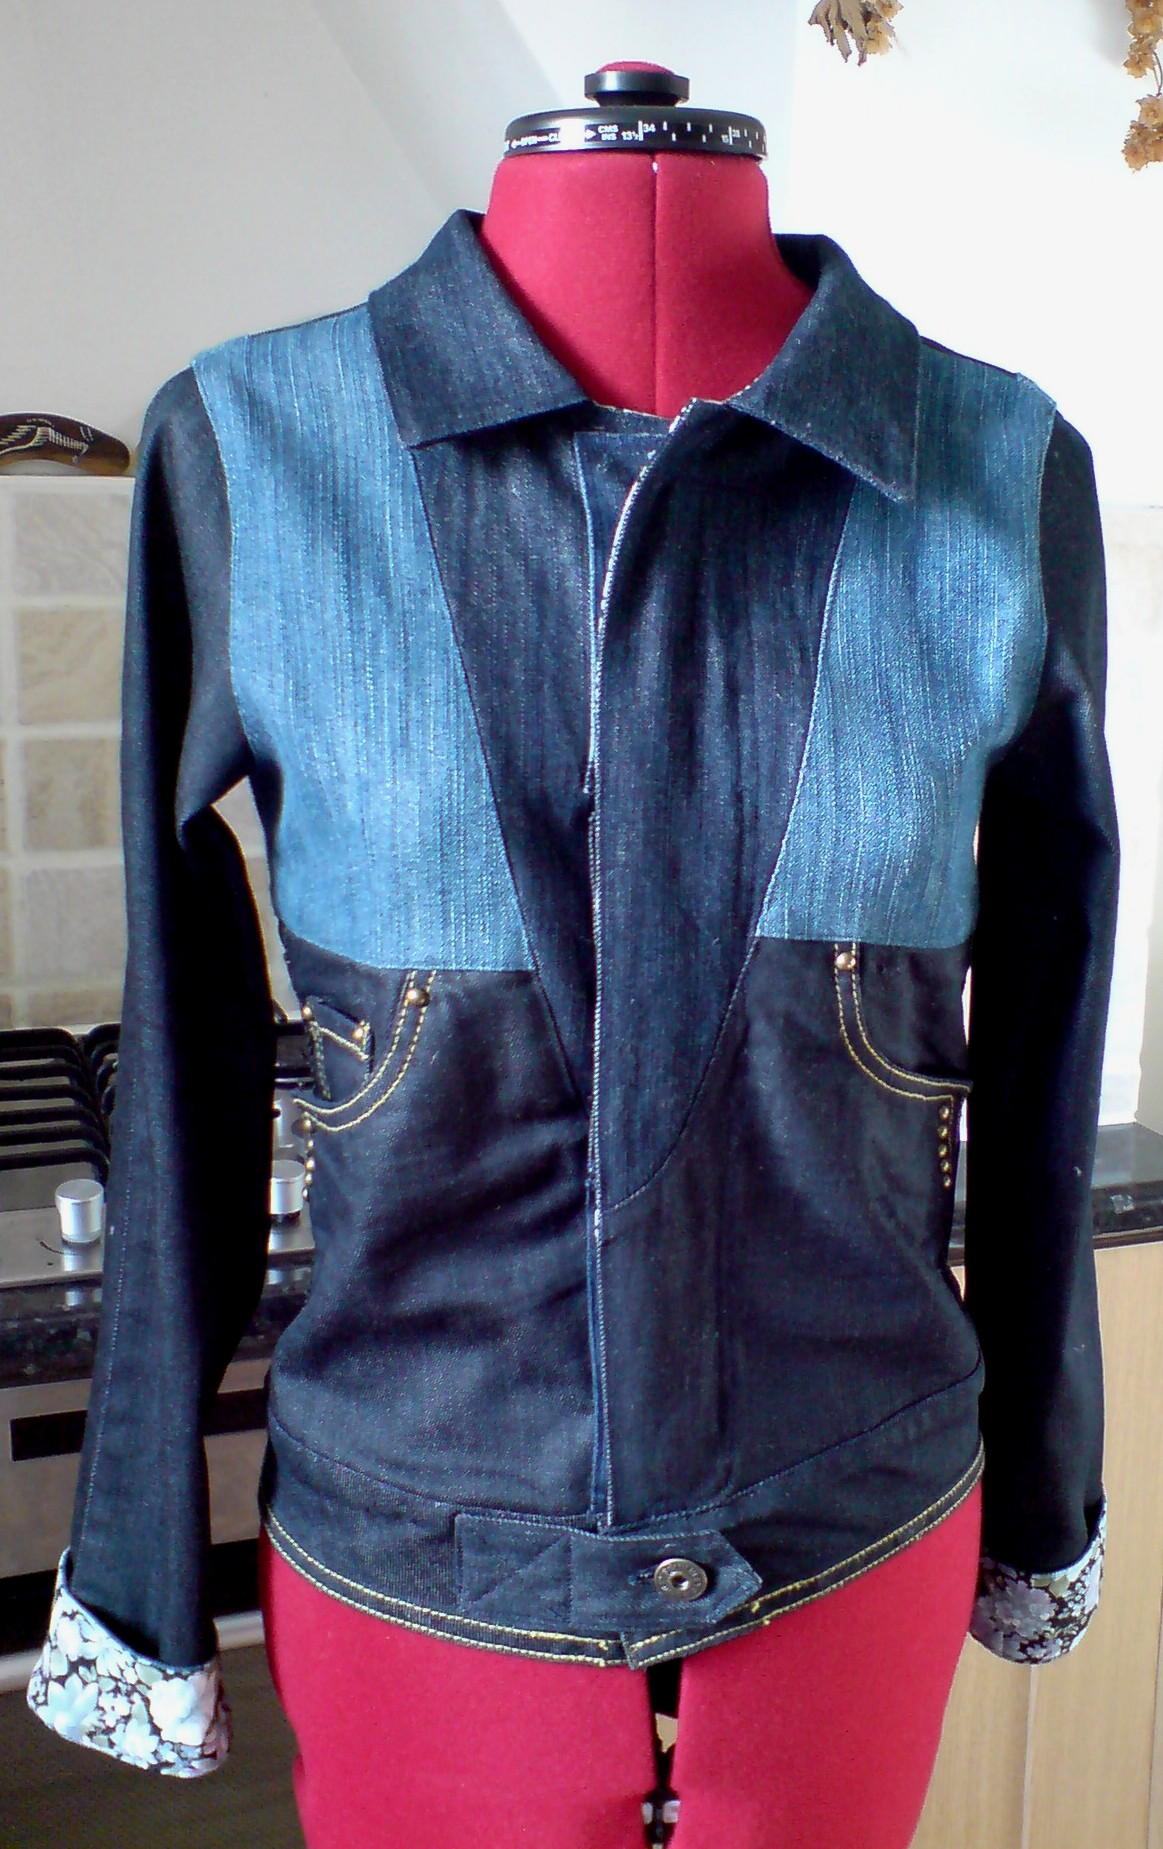 Recycled denim/jeans jacket – Sewing Projects | BurdaStyle.com